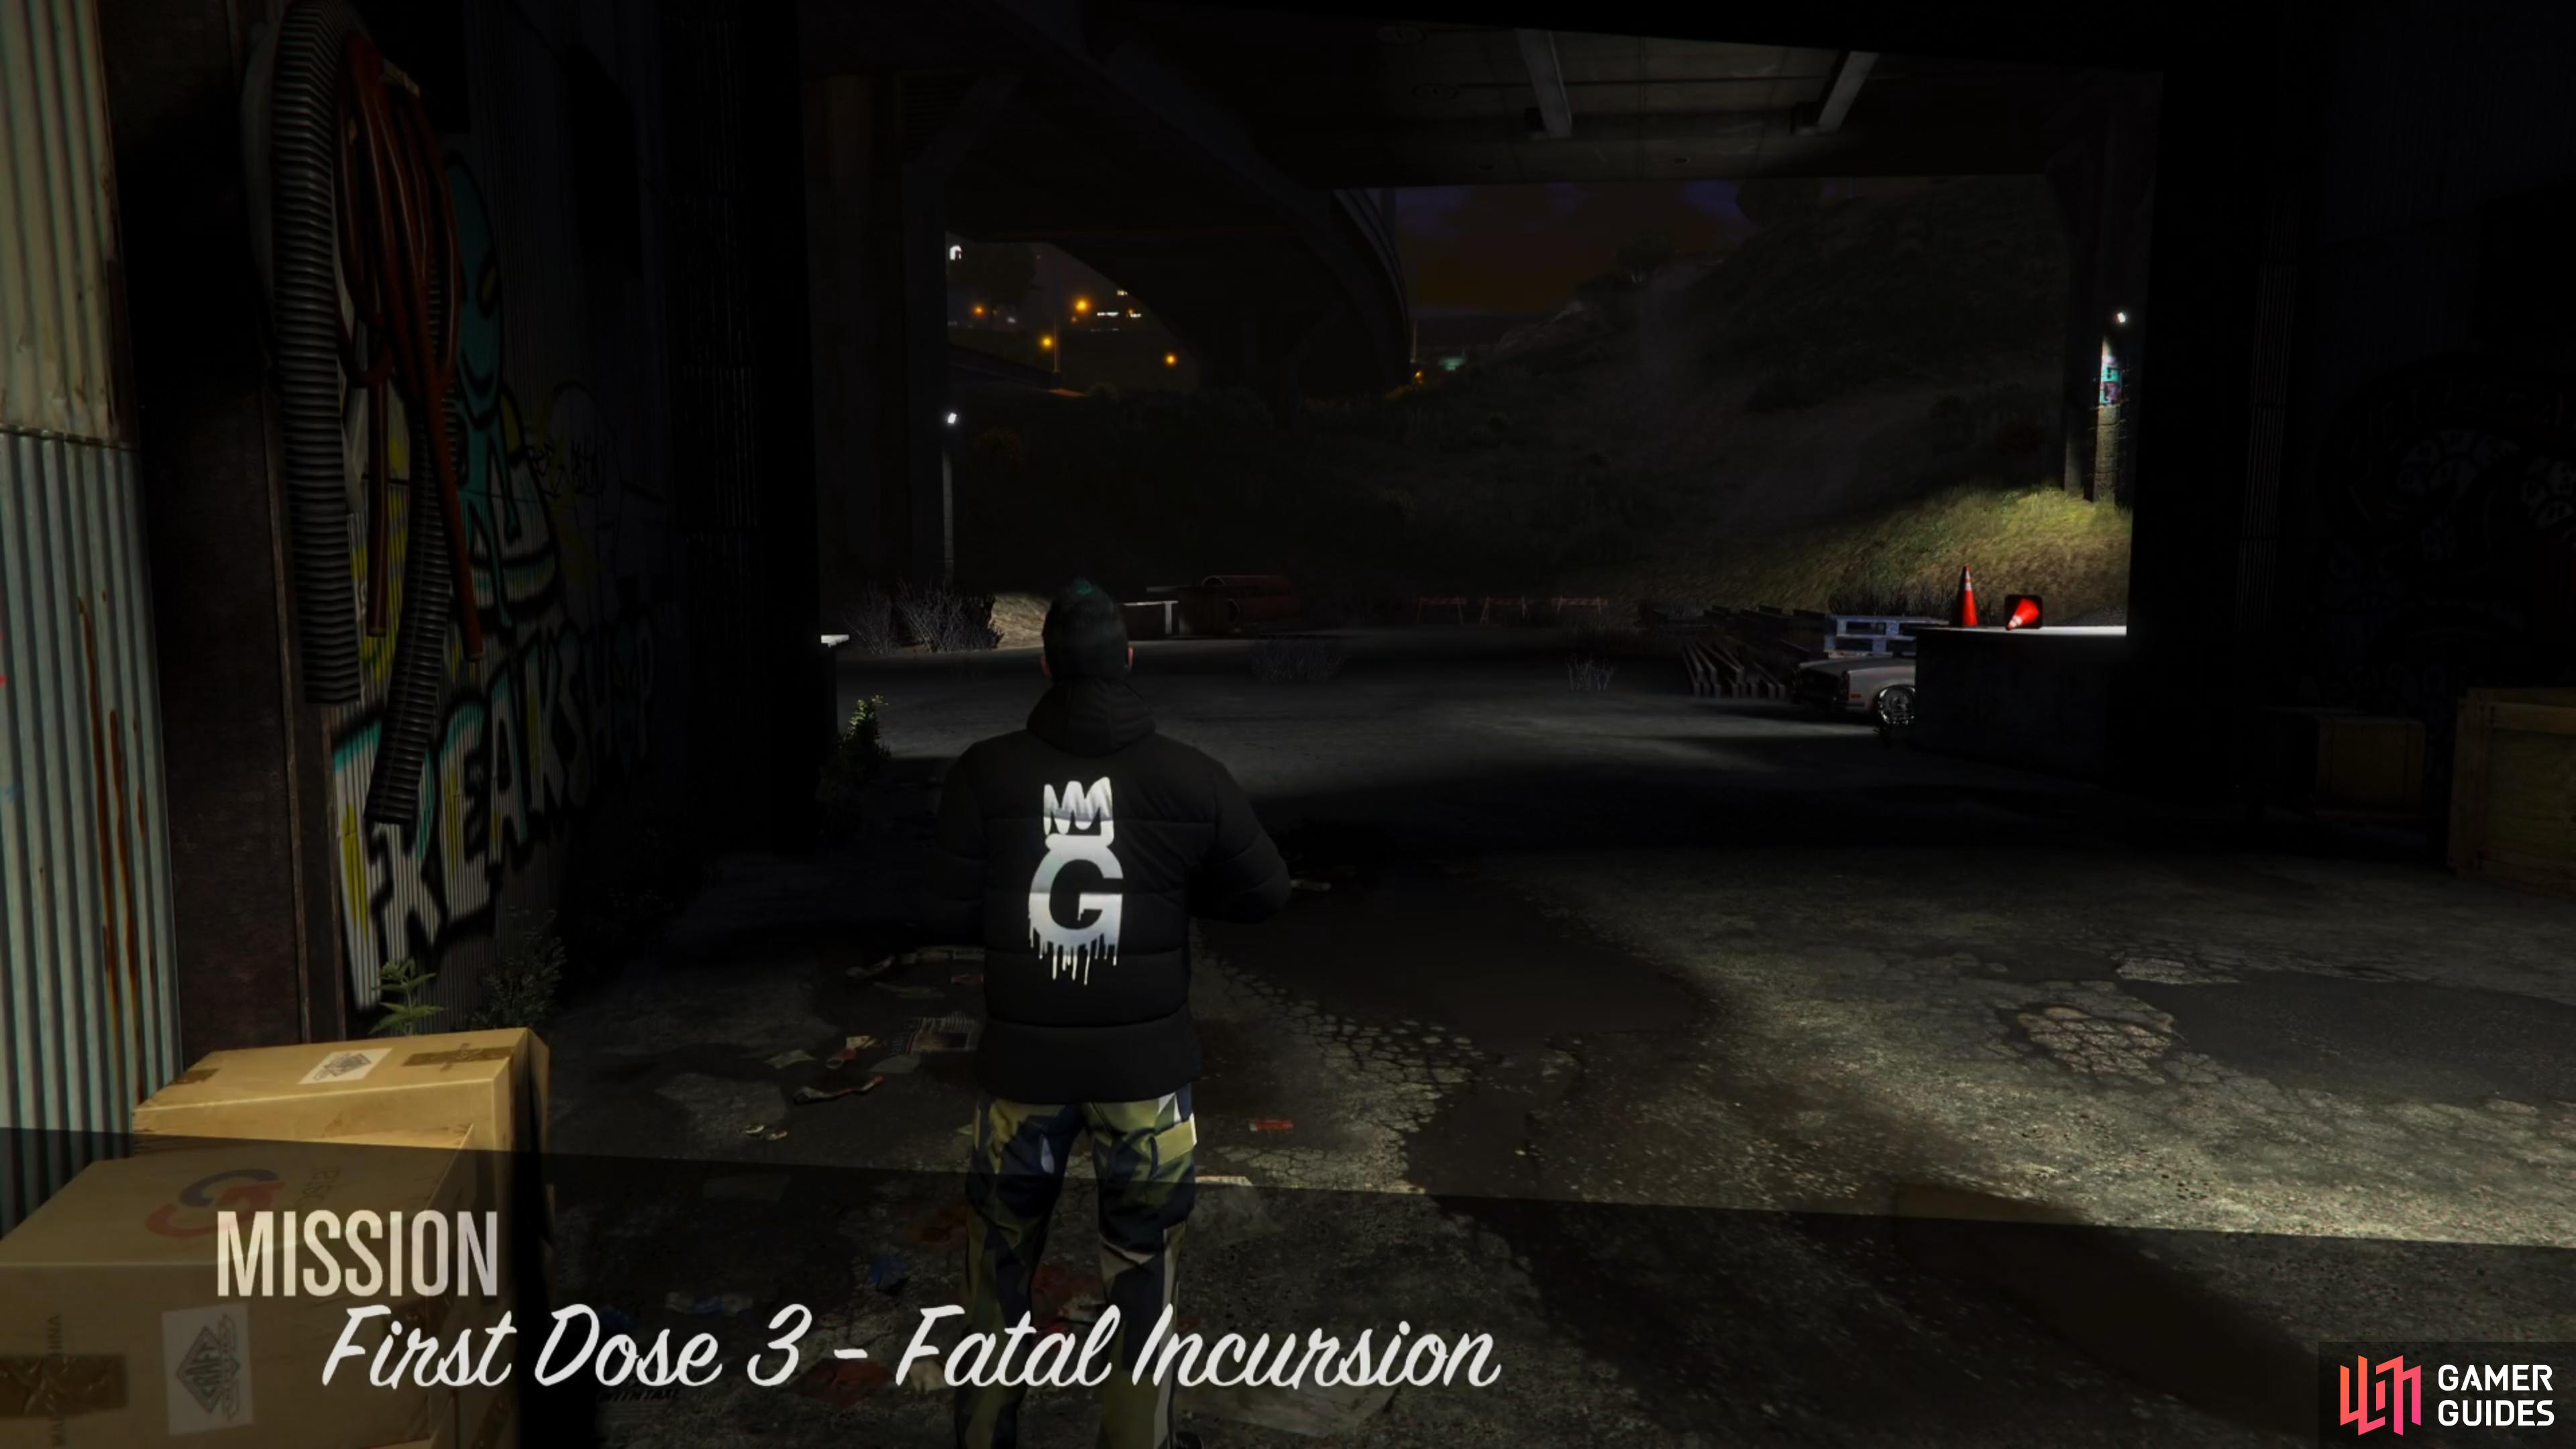 You can start the Fatal Incursion Mission from the Abandoned Warehouse.